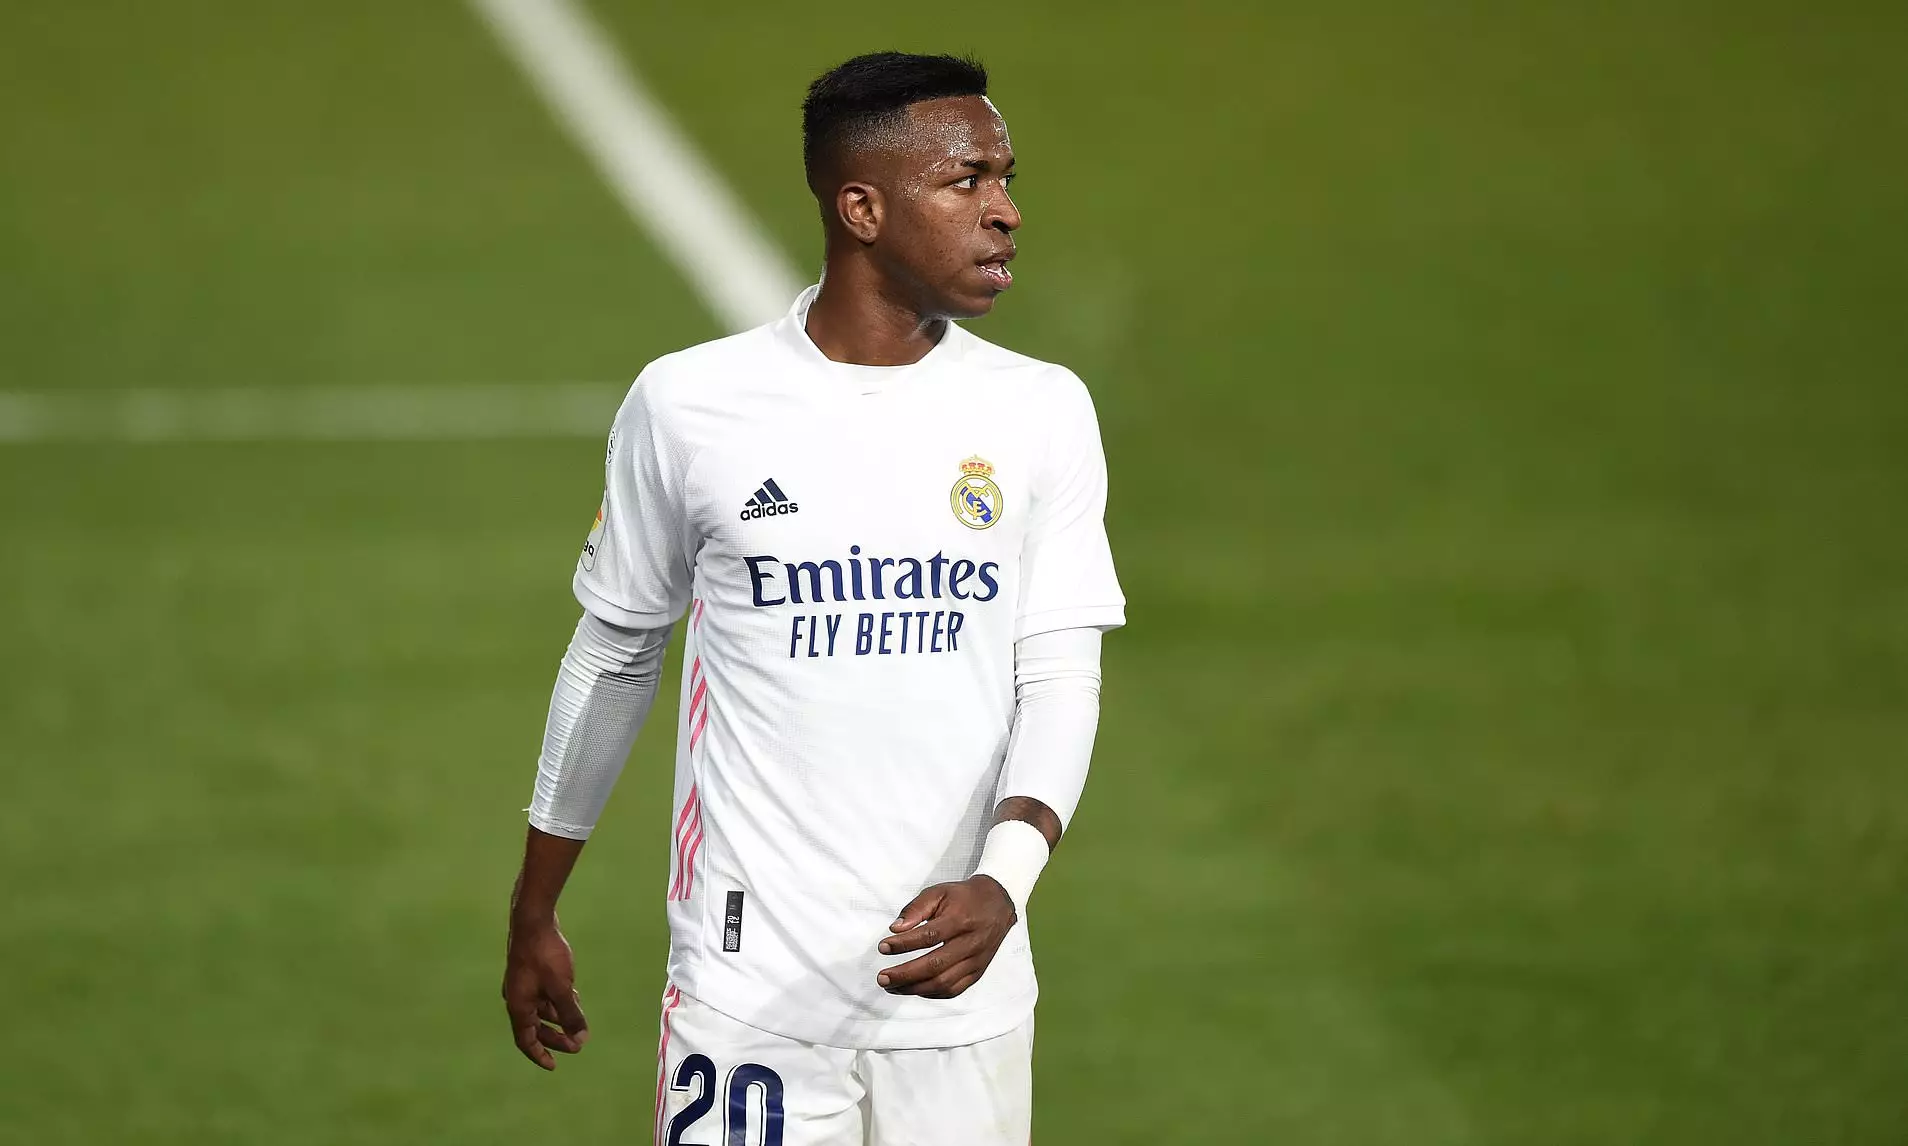 Real Madrid reportedly offered Vinicius Jr to Manchester United this summer